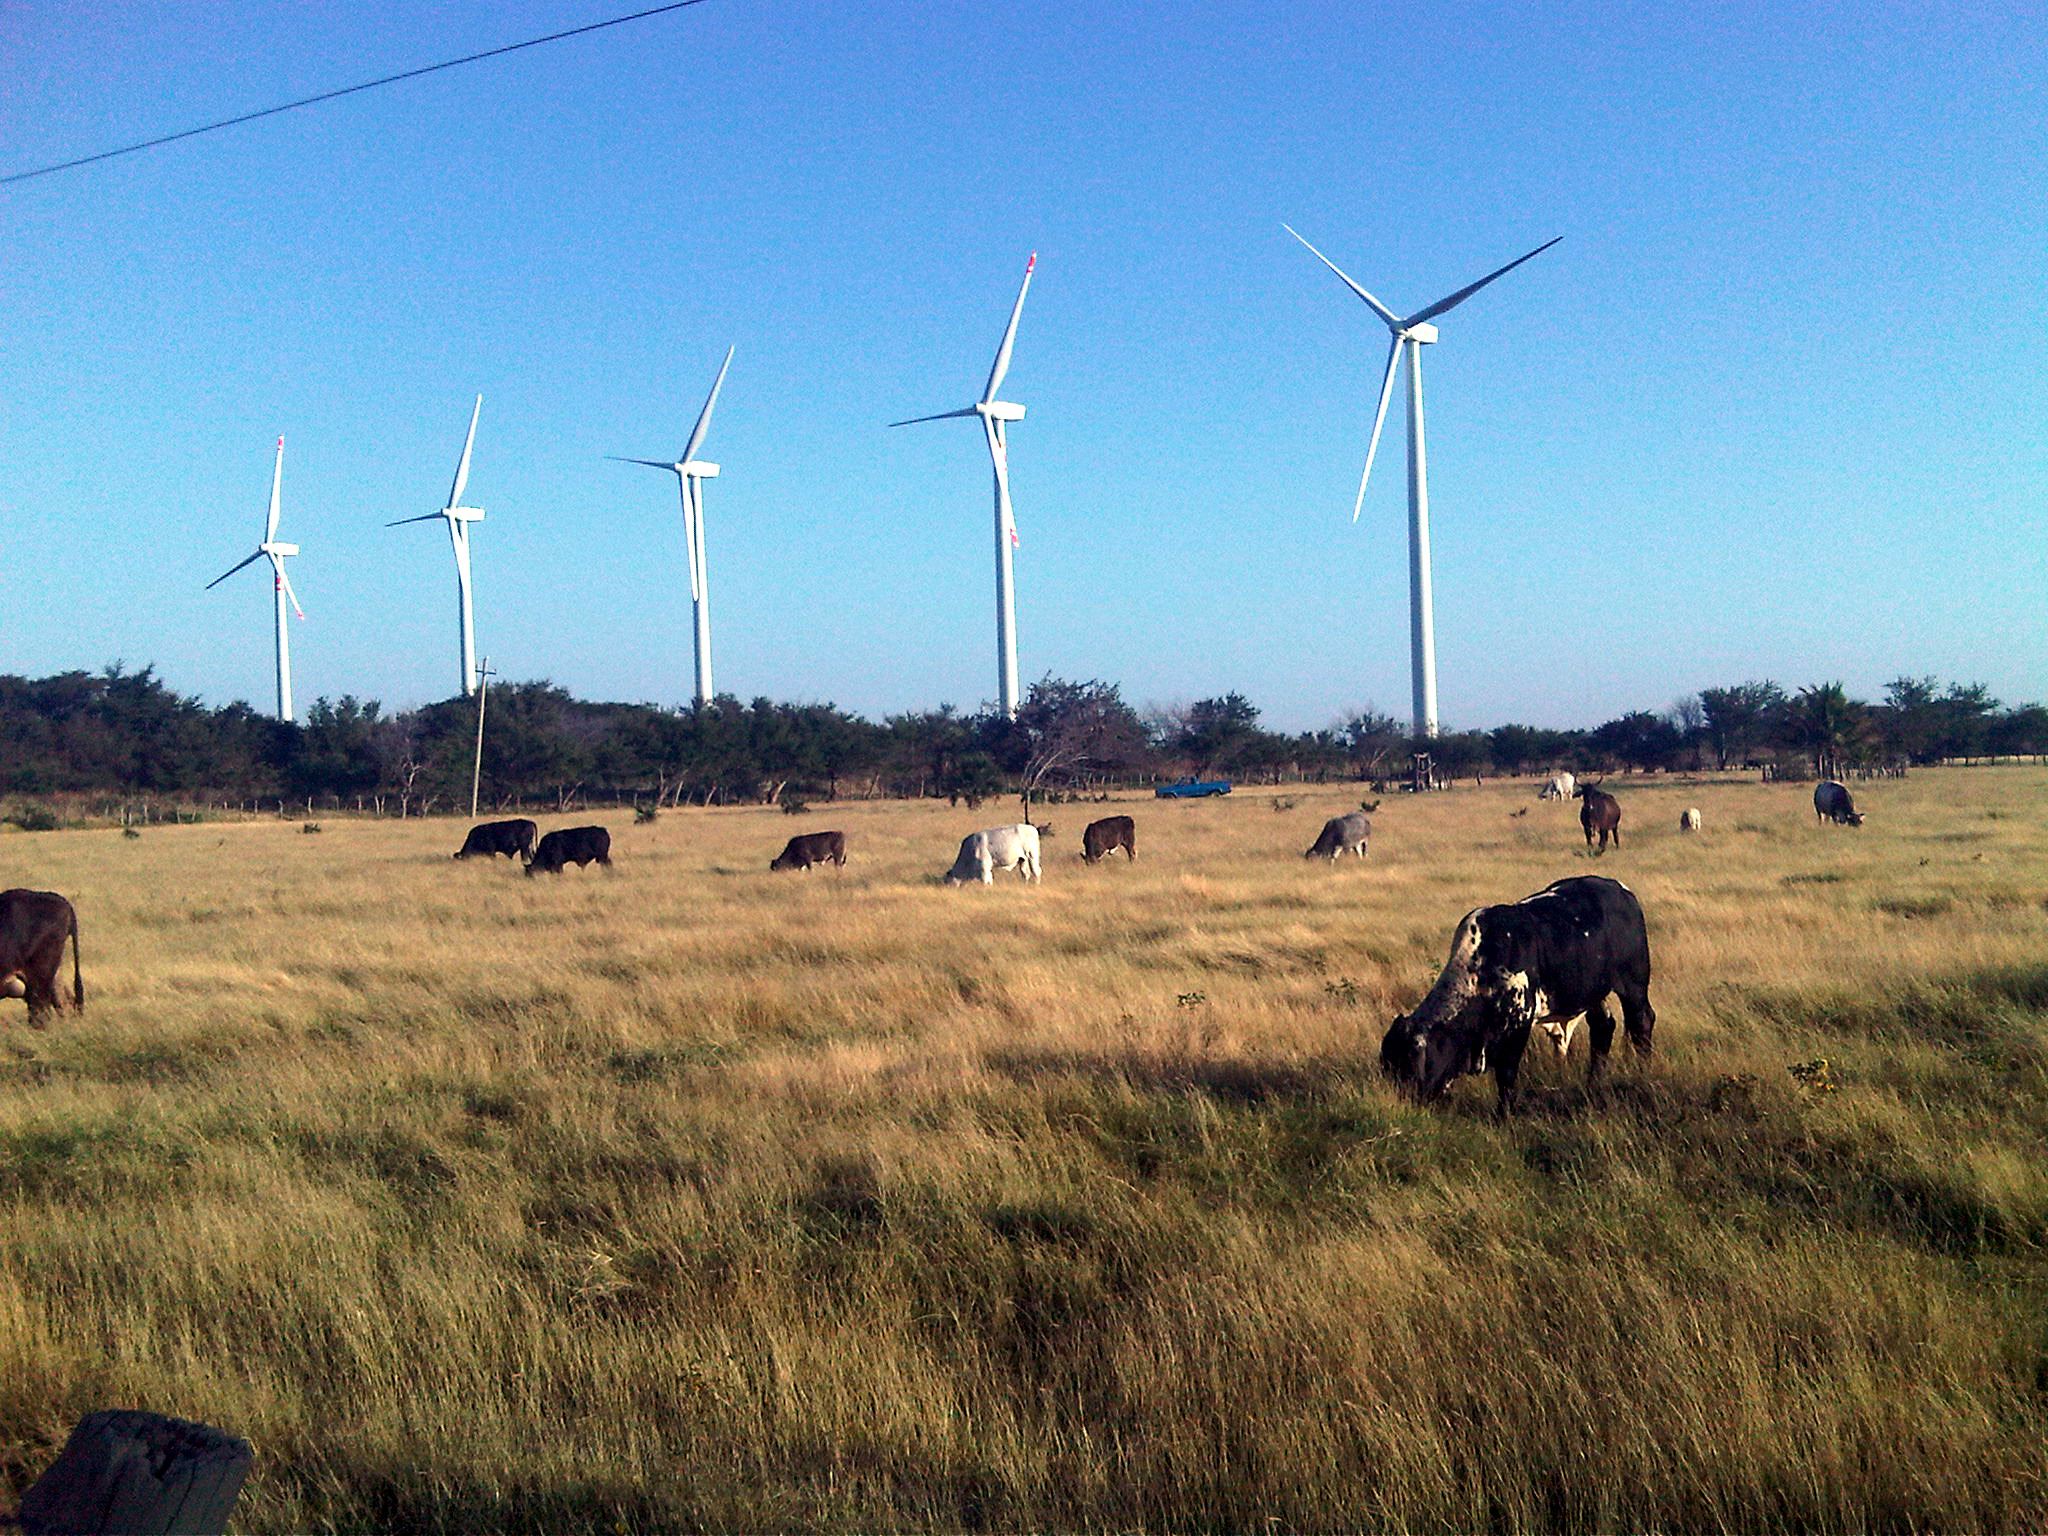 Wind power plants in Mexico